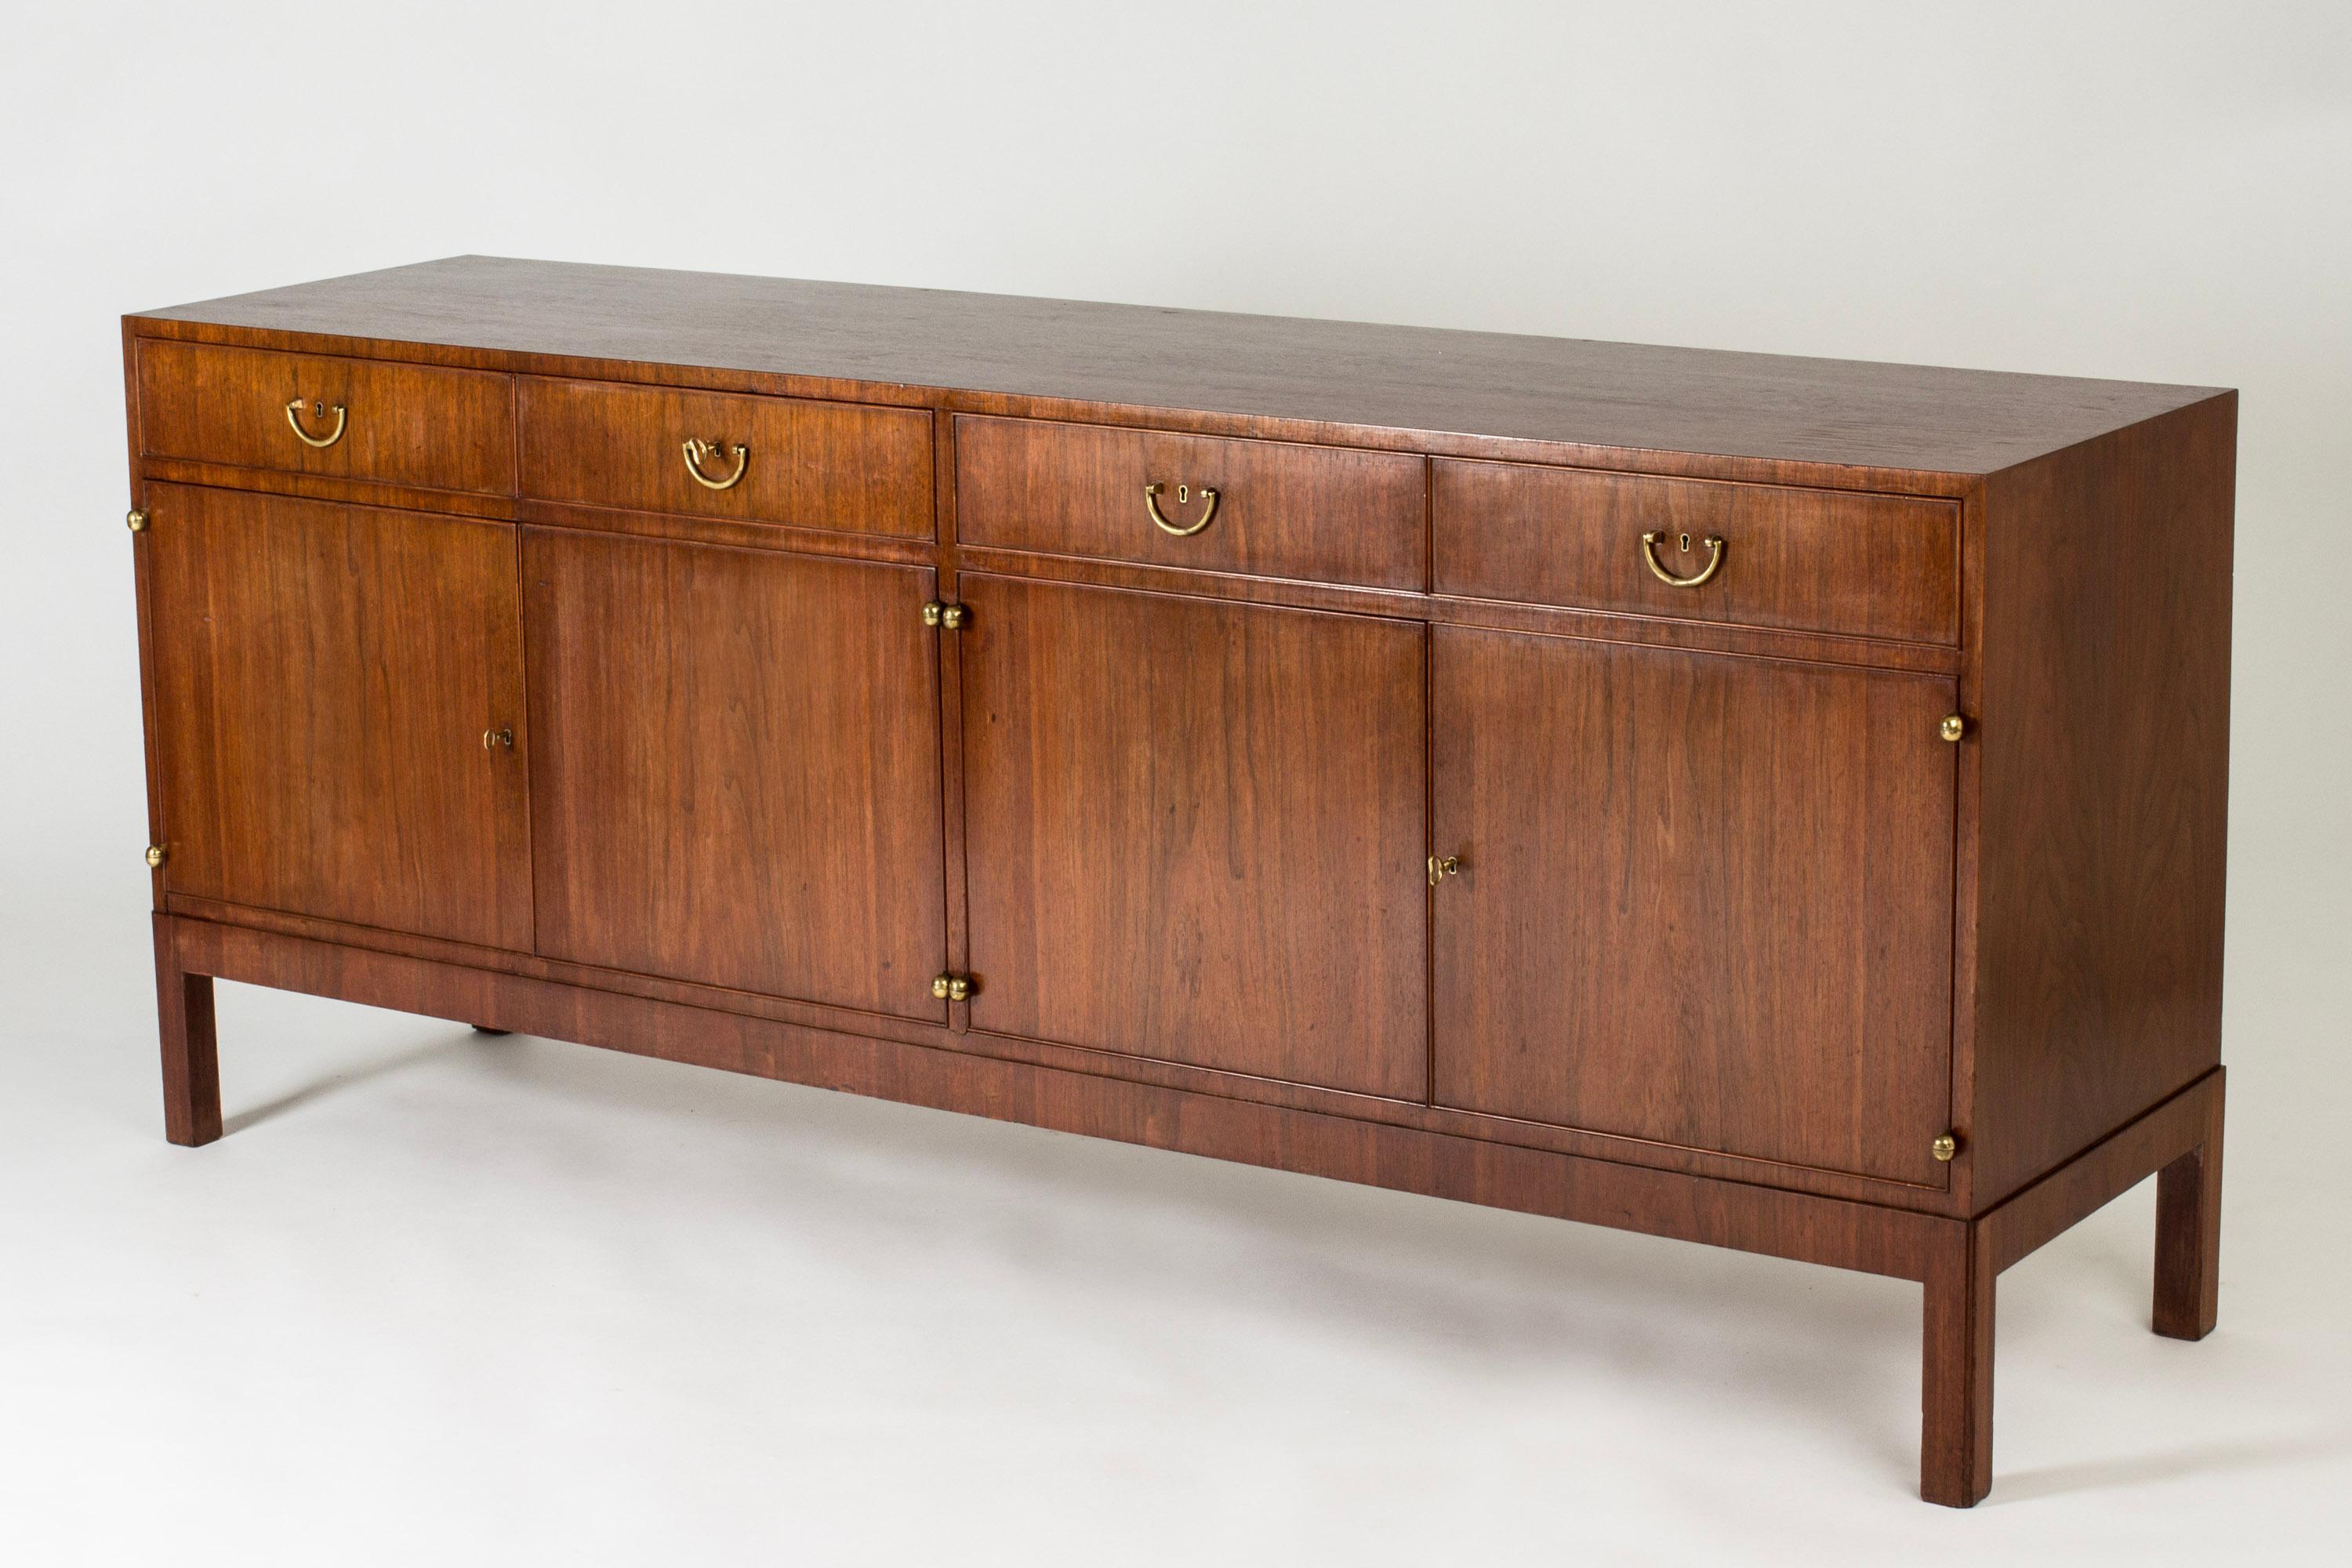 Elegant mahogany sideboard by Josef Frank, in a rare large size. Decorative brass details.